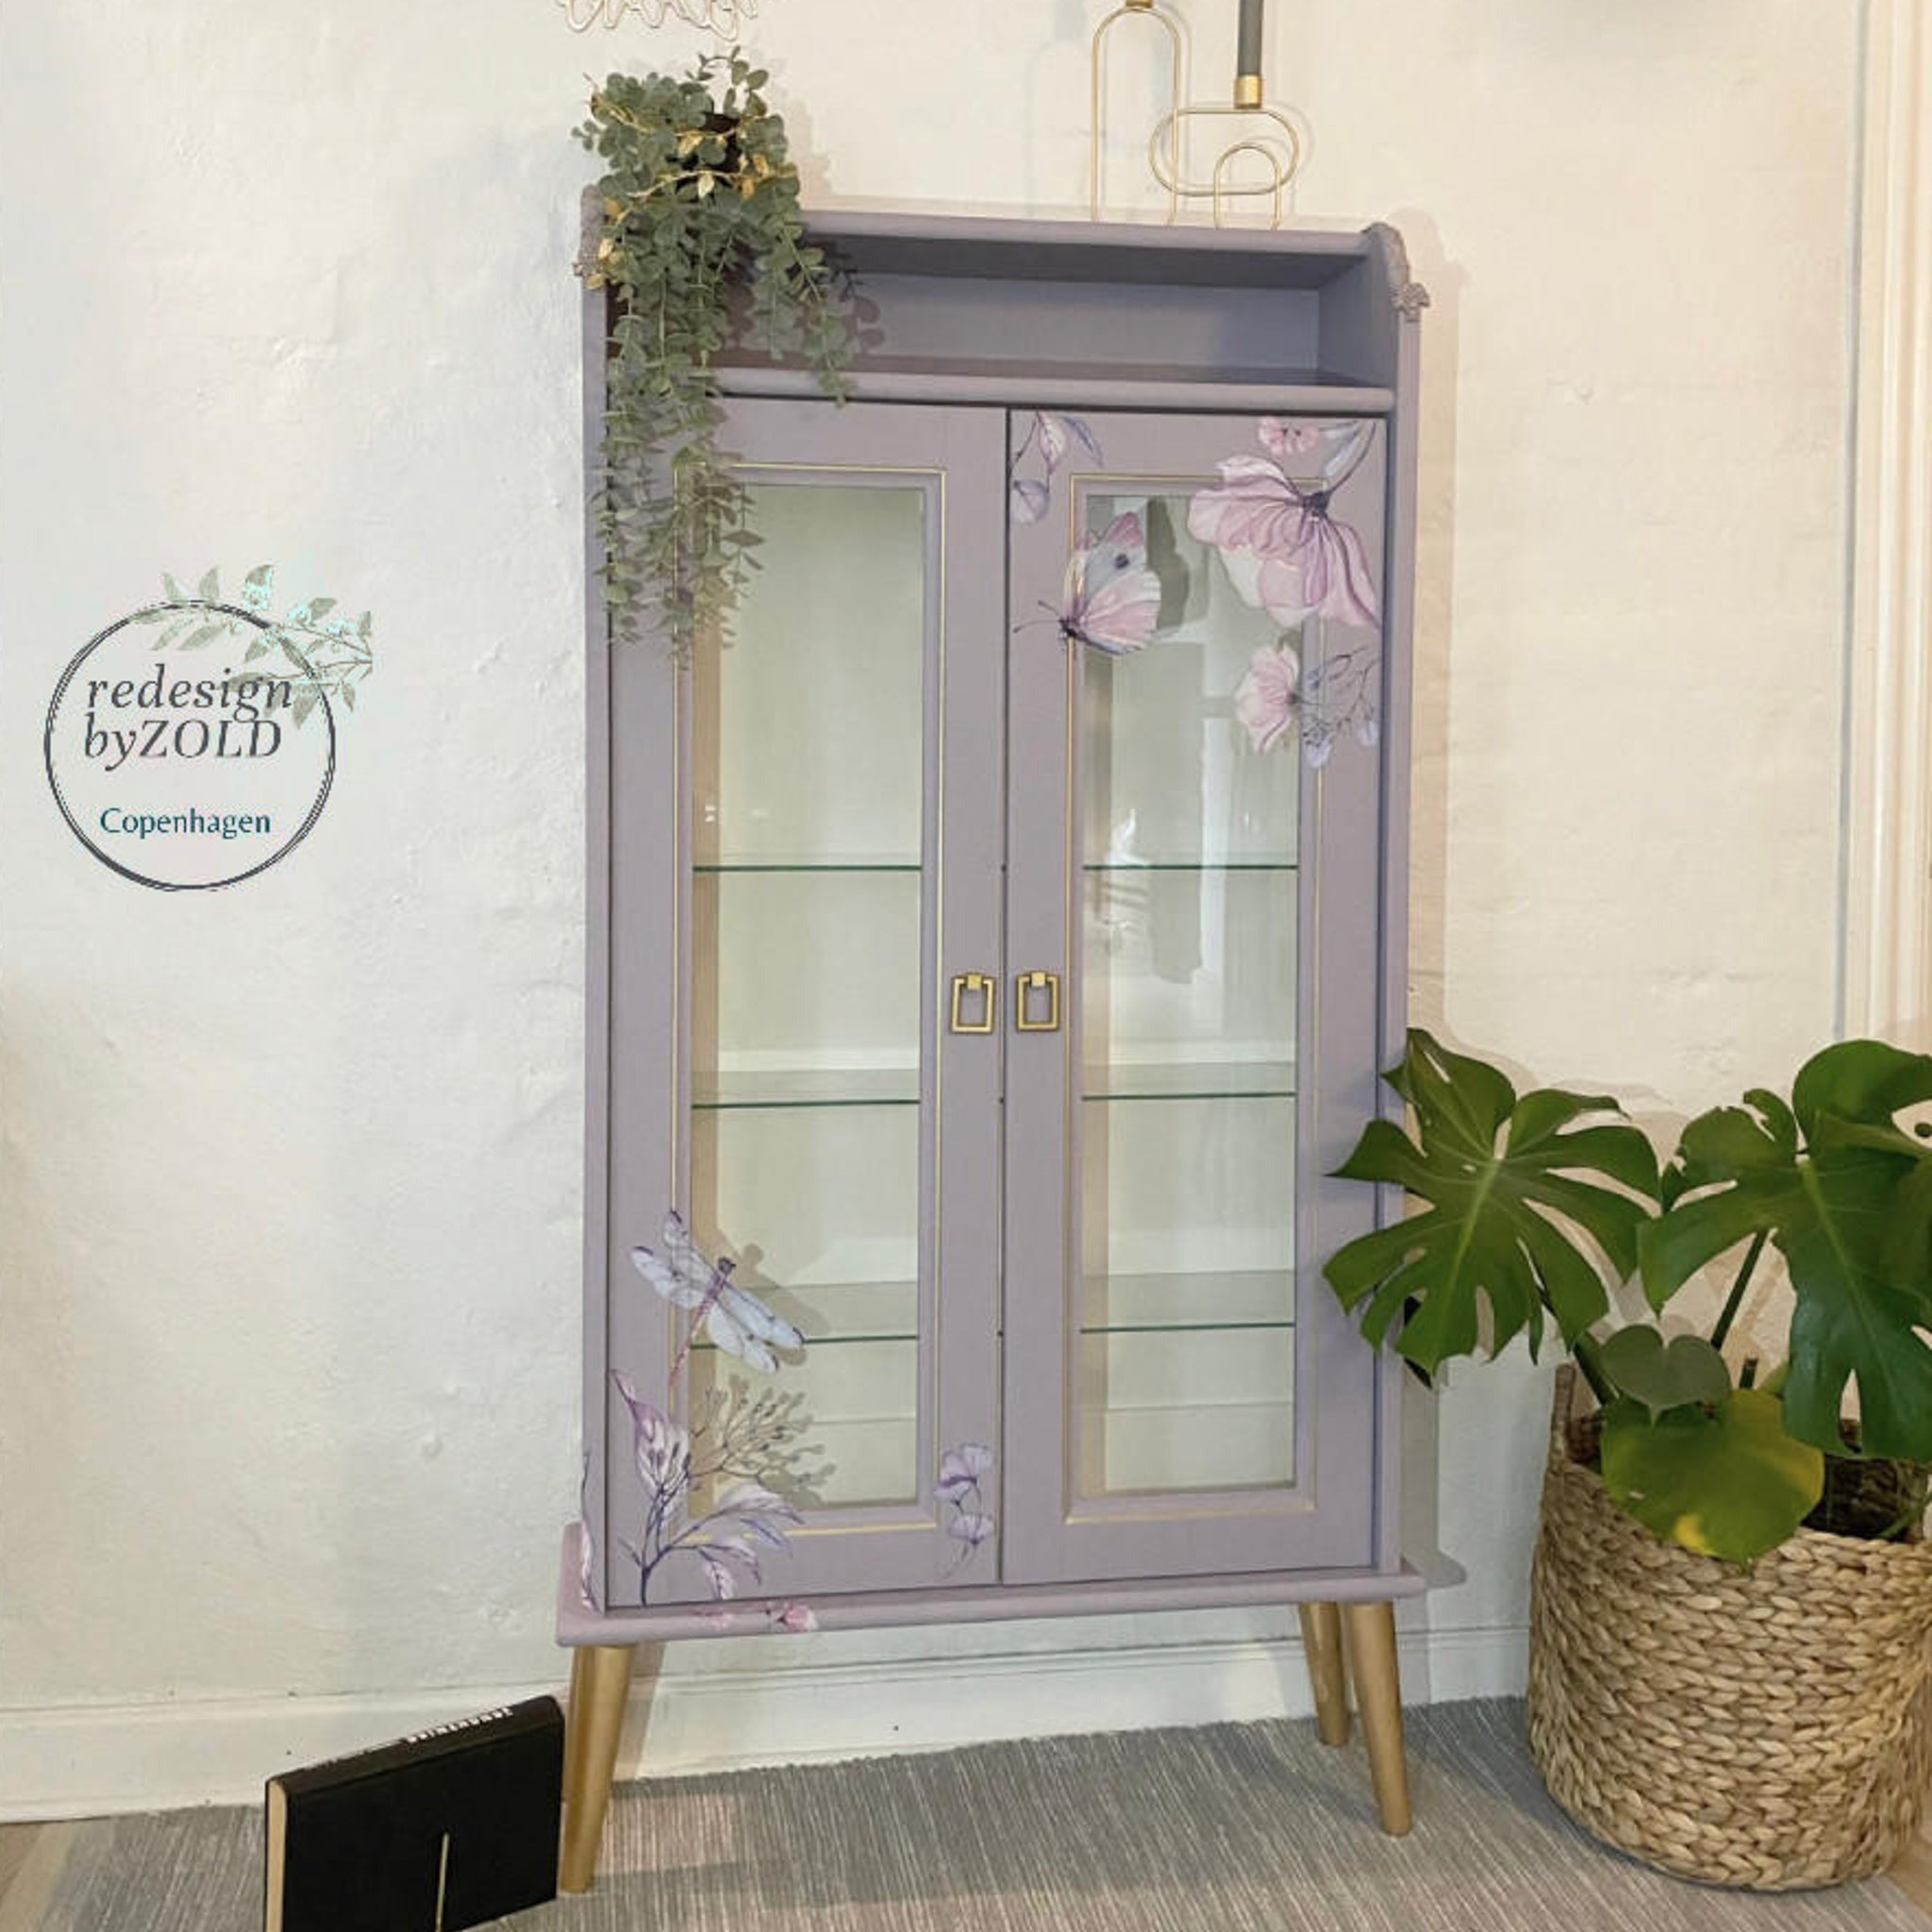 An enclosed bookcase refurbished by Redesign by Zold Copenhagen is painted a soft purple and features the Translucent Garden Transfer on the front.